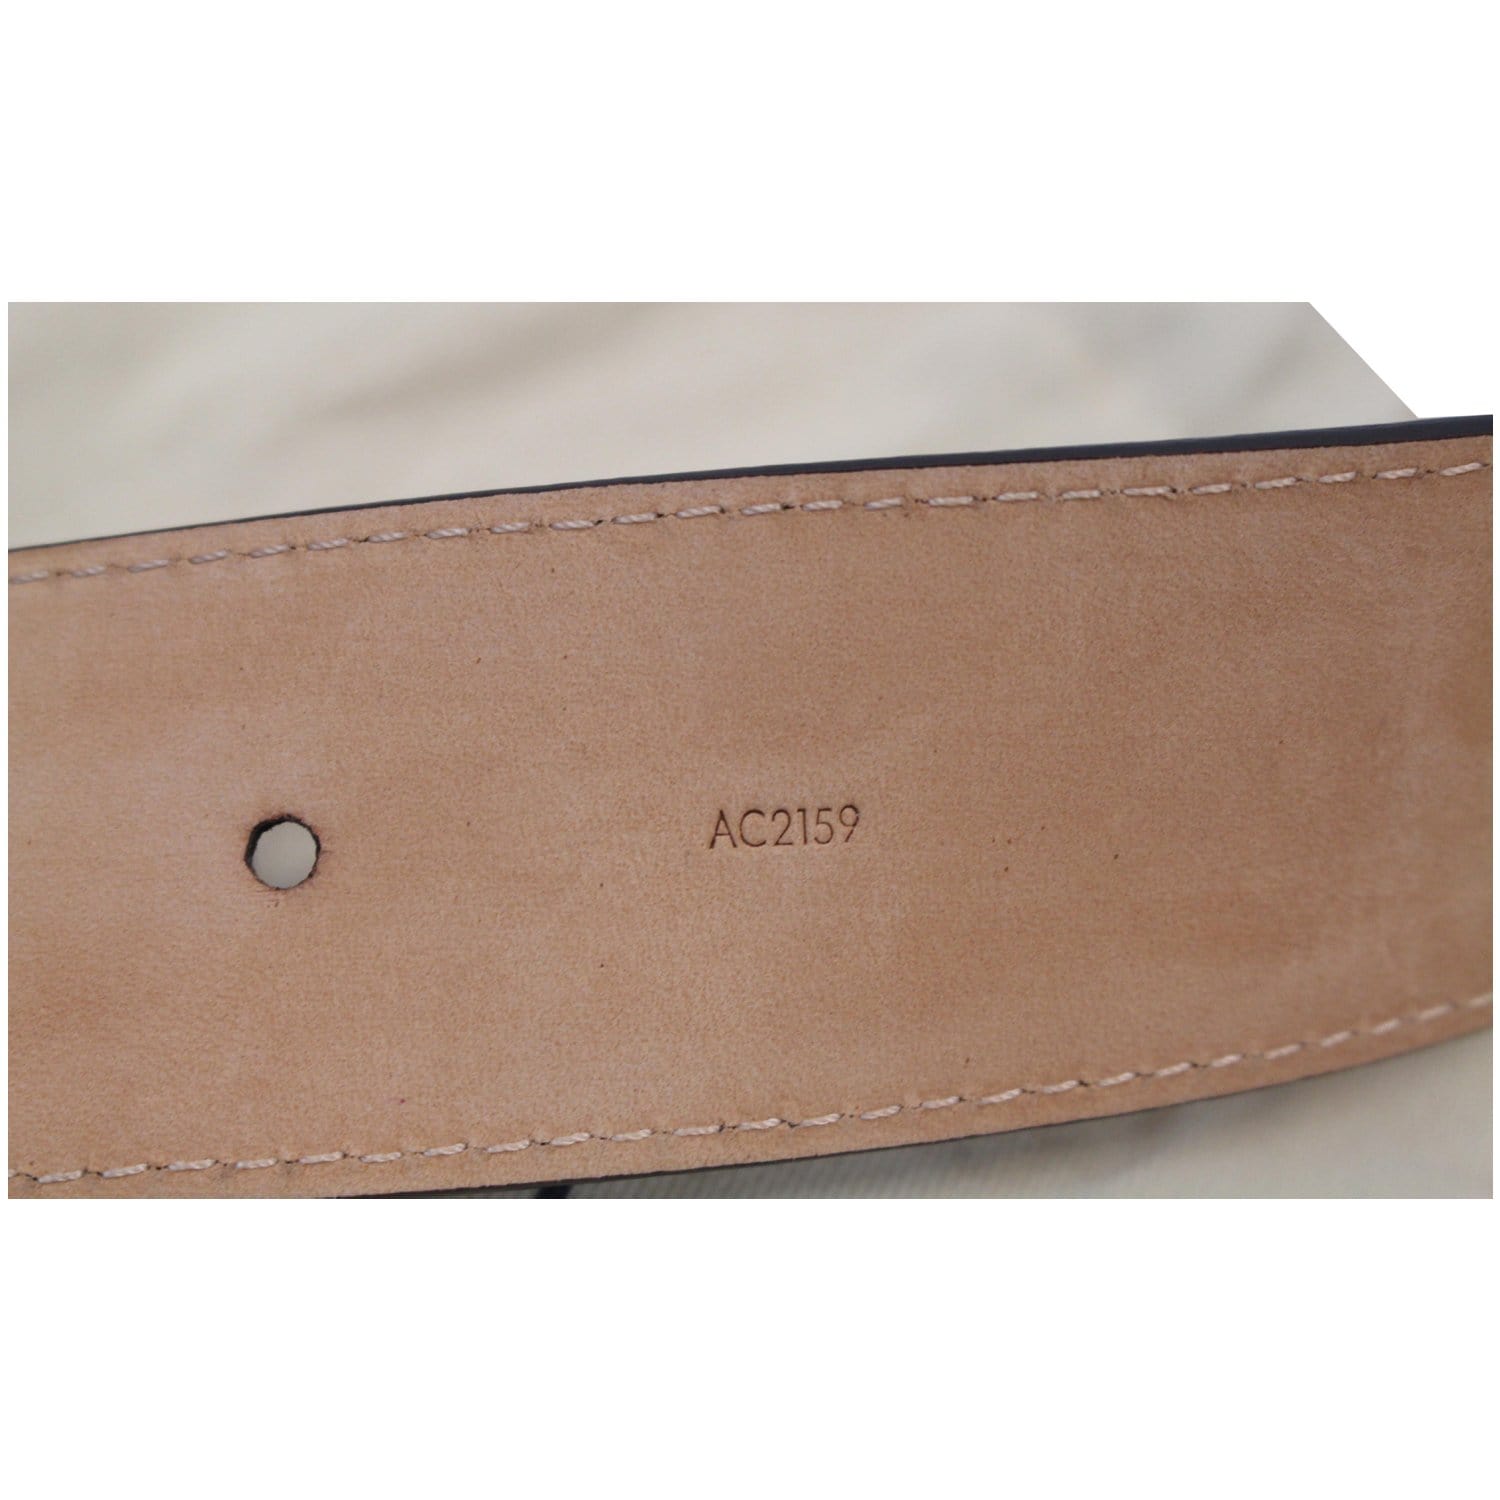 Initiales leather belt Louis Vuitton Brown size 100 cm in Leather - 32761043